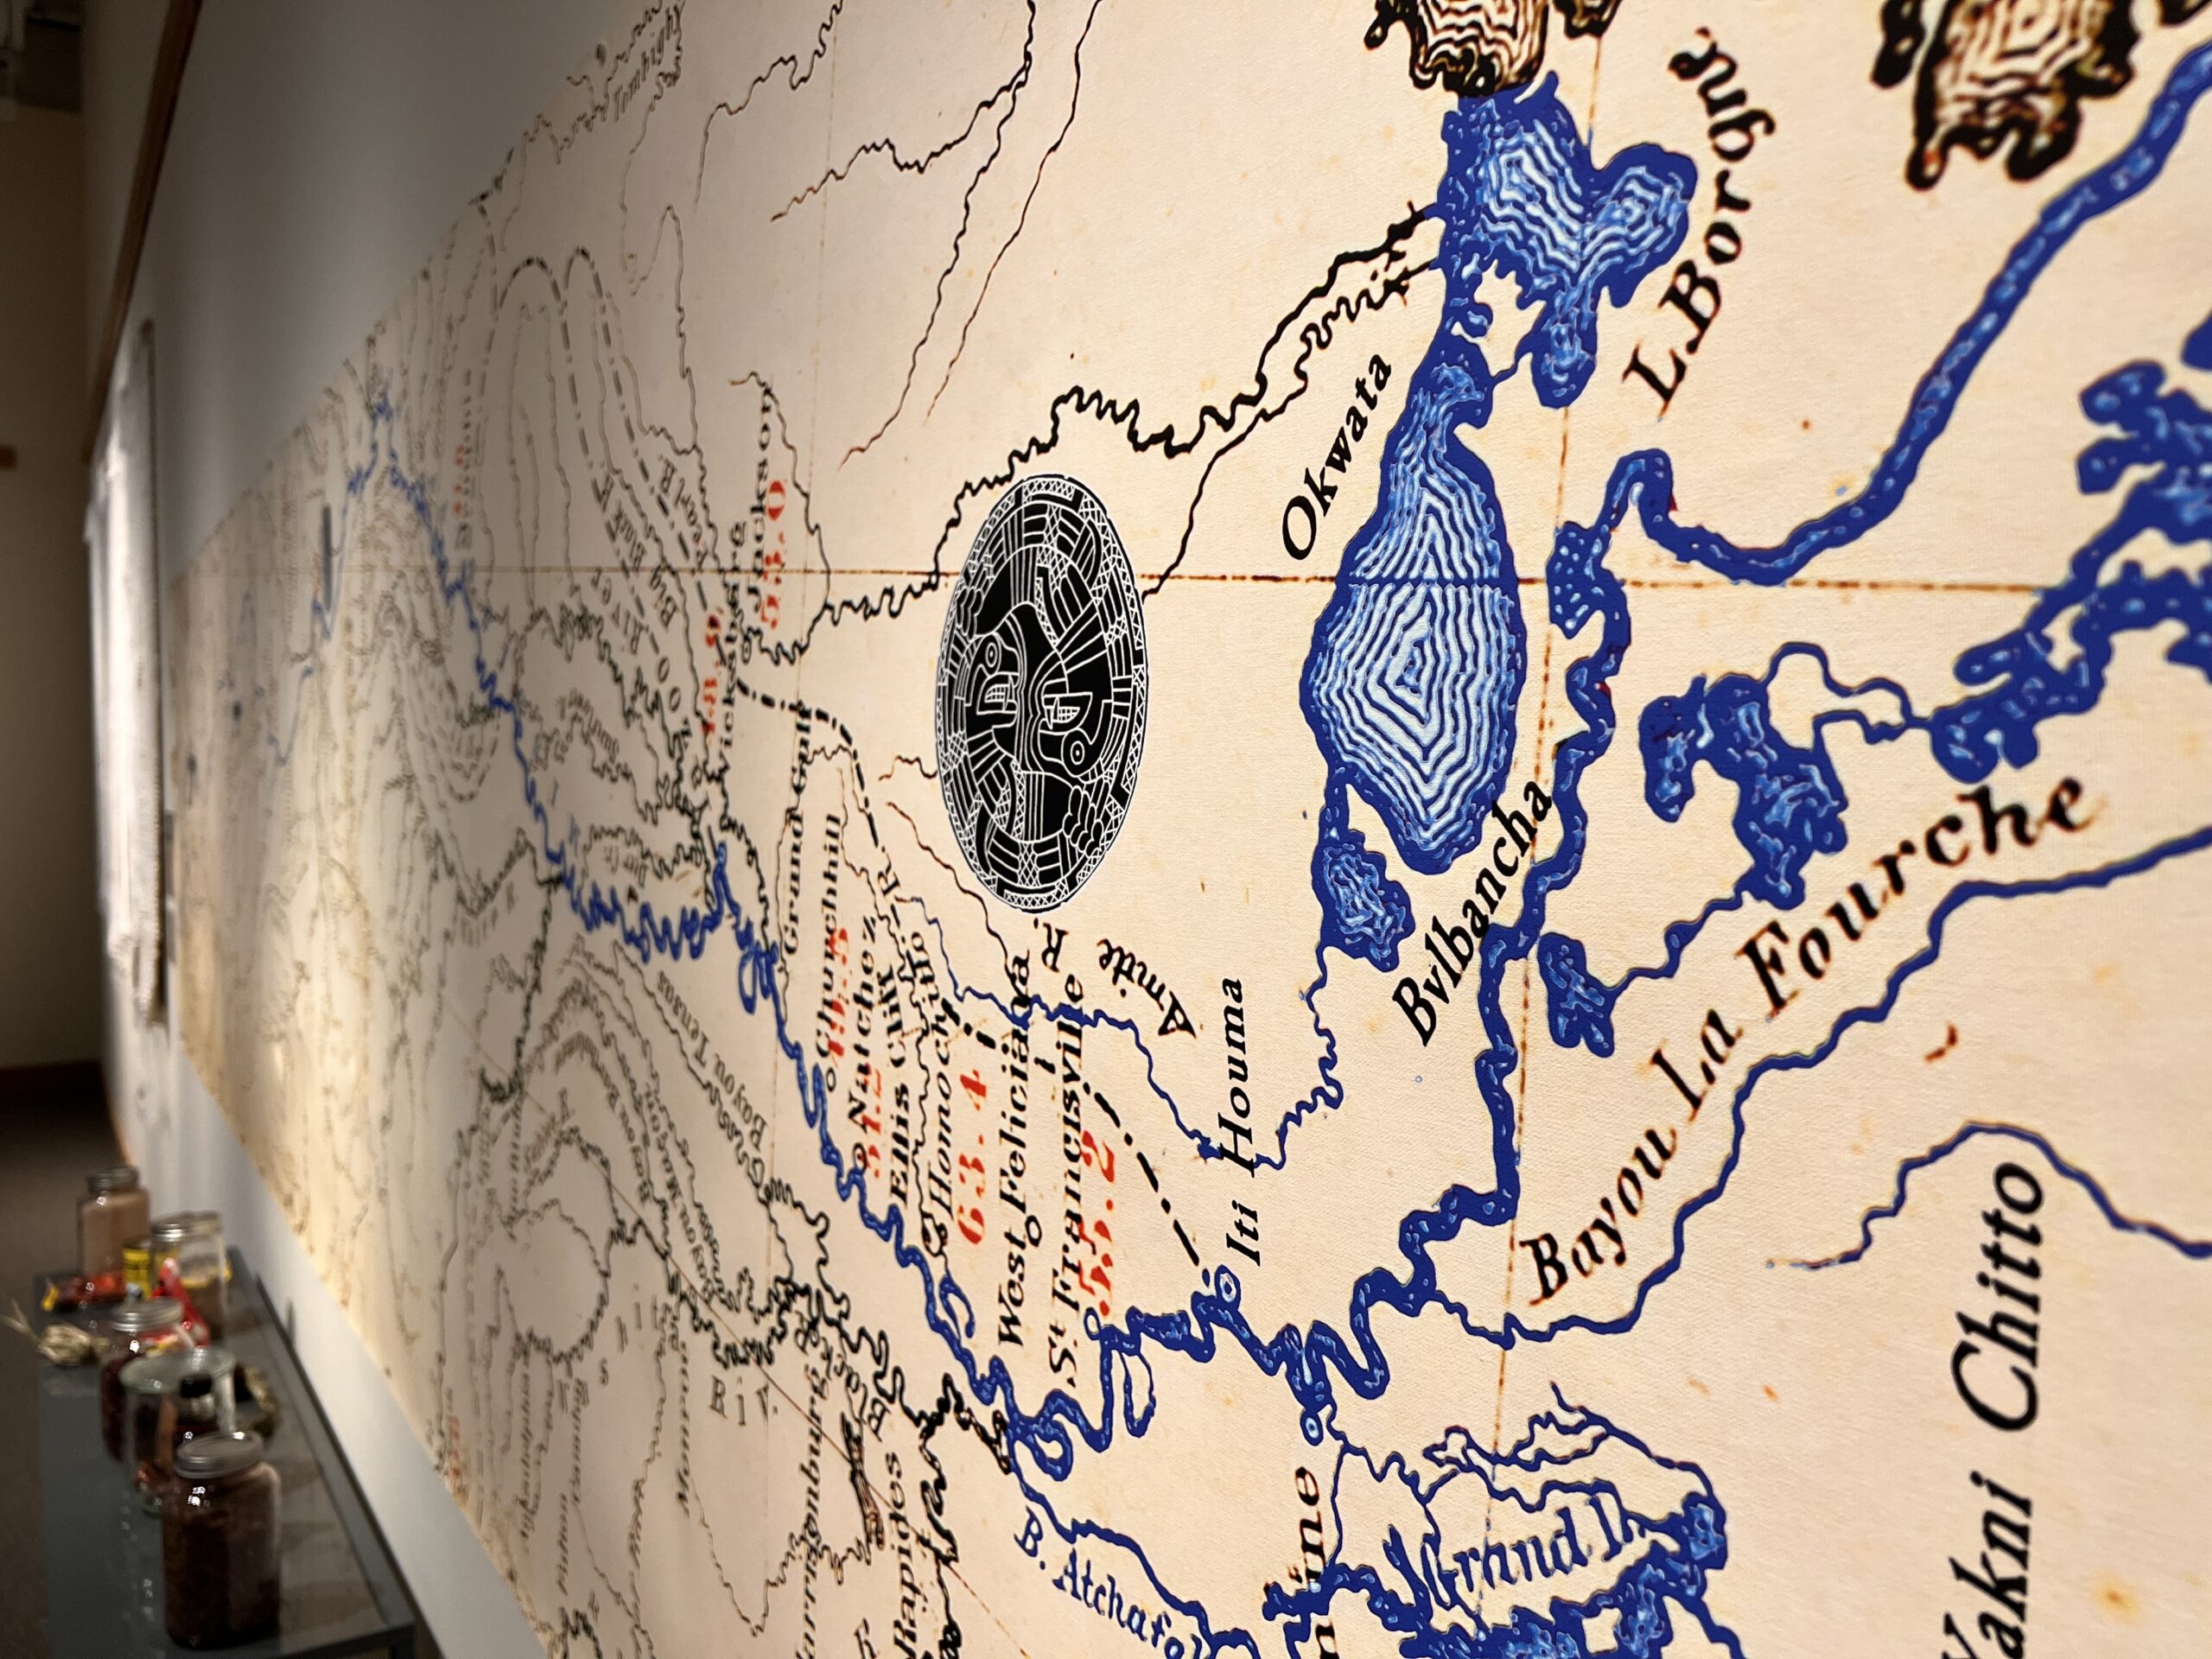 A vinyl print of a map of the basins of the Mississippi and tributaries, hung up on a wall.